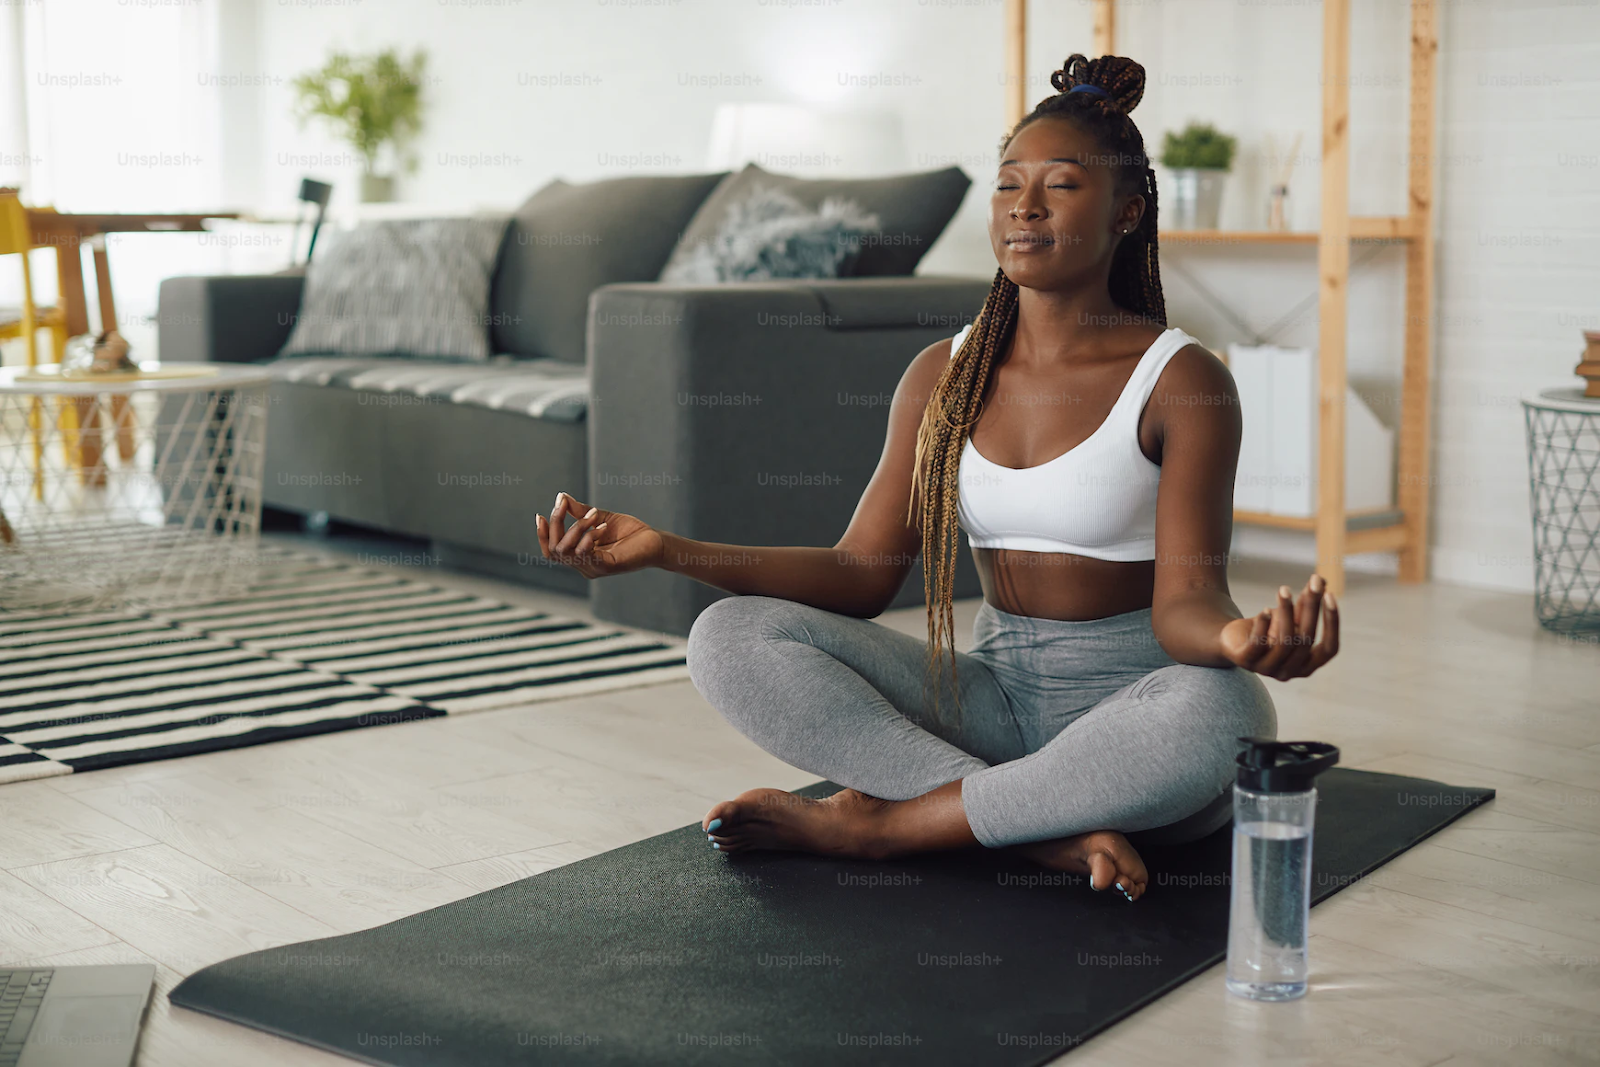 A black woman with braids, wearing a white sports bra and gray leggings, meditates on a yoga mat - How to Navigate Social Anxiety in College